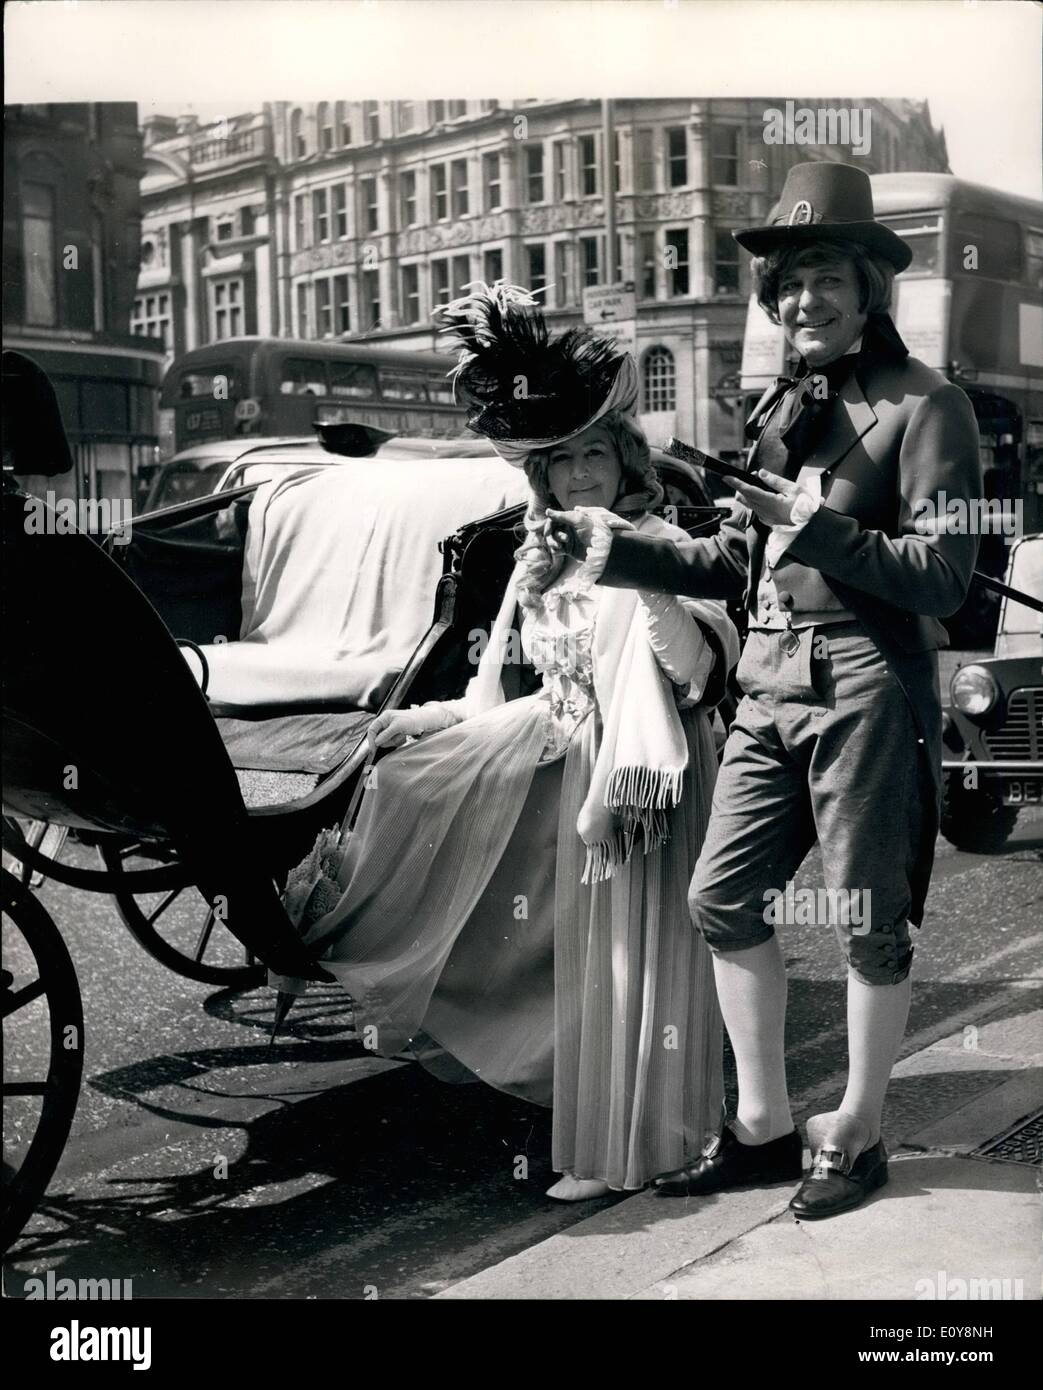 May 05, 1969 - 150th, ANNIVERSARY OF BURLINGTON ARCADE, Some of the colour and ;style of Regency London was recaptured today when ''The Duke and Duchees of KnightebriOW in costume of the period, drove in an open horse-drawl landau from Knightsbridge to the Burlington Arcade, After being received at the Hyde Park Hotel where the, were entertained by Mt. Wilbraham, the hotel manager, they left the hotel and the landau followed the route taken by titled ladies of Knightsbridge Village in 1819 when going Stock Photo